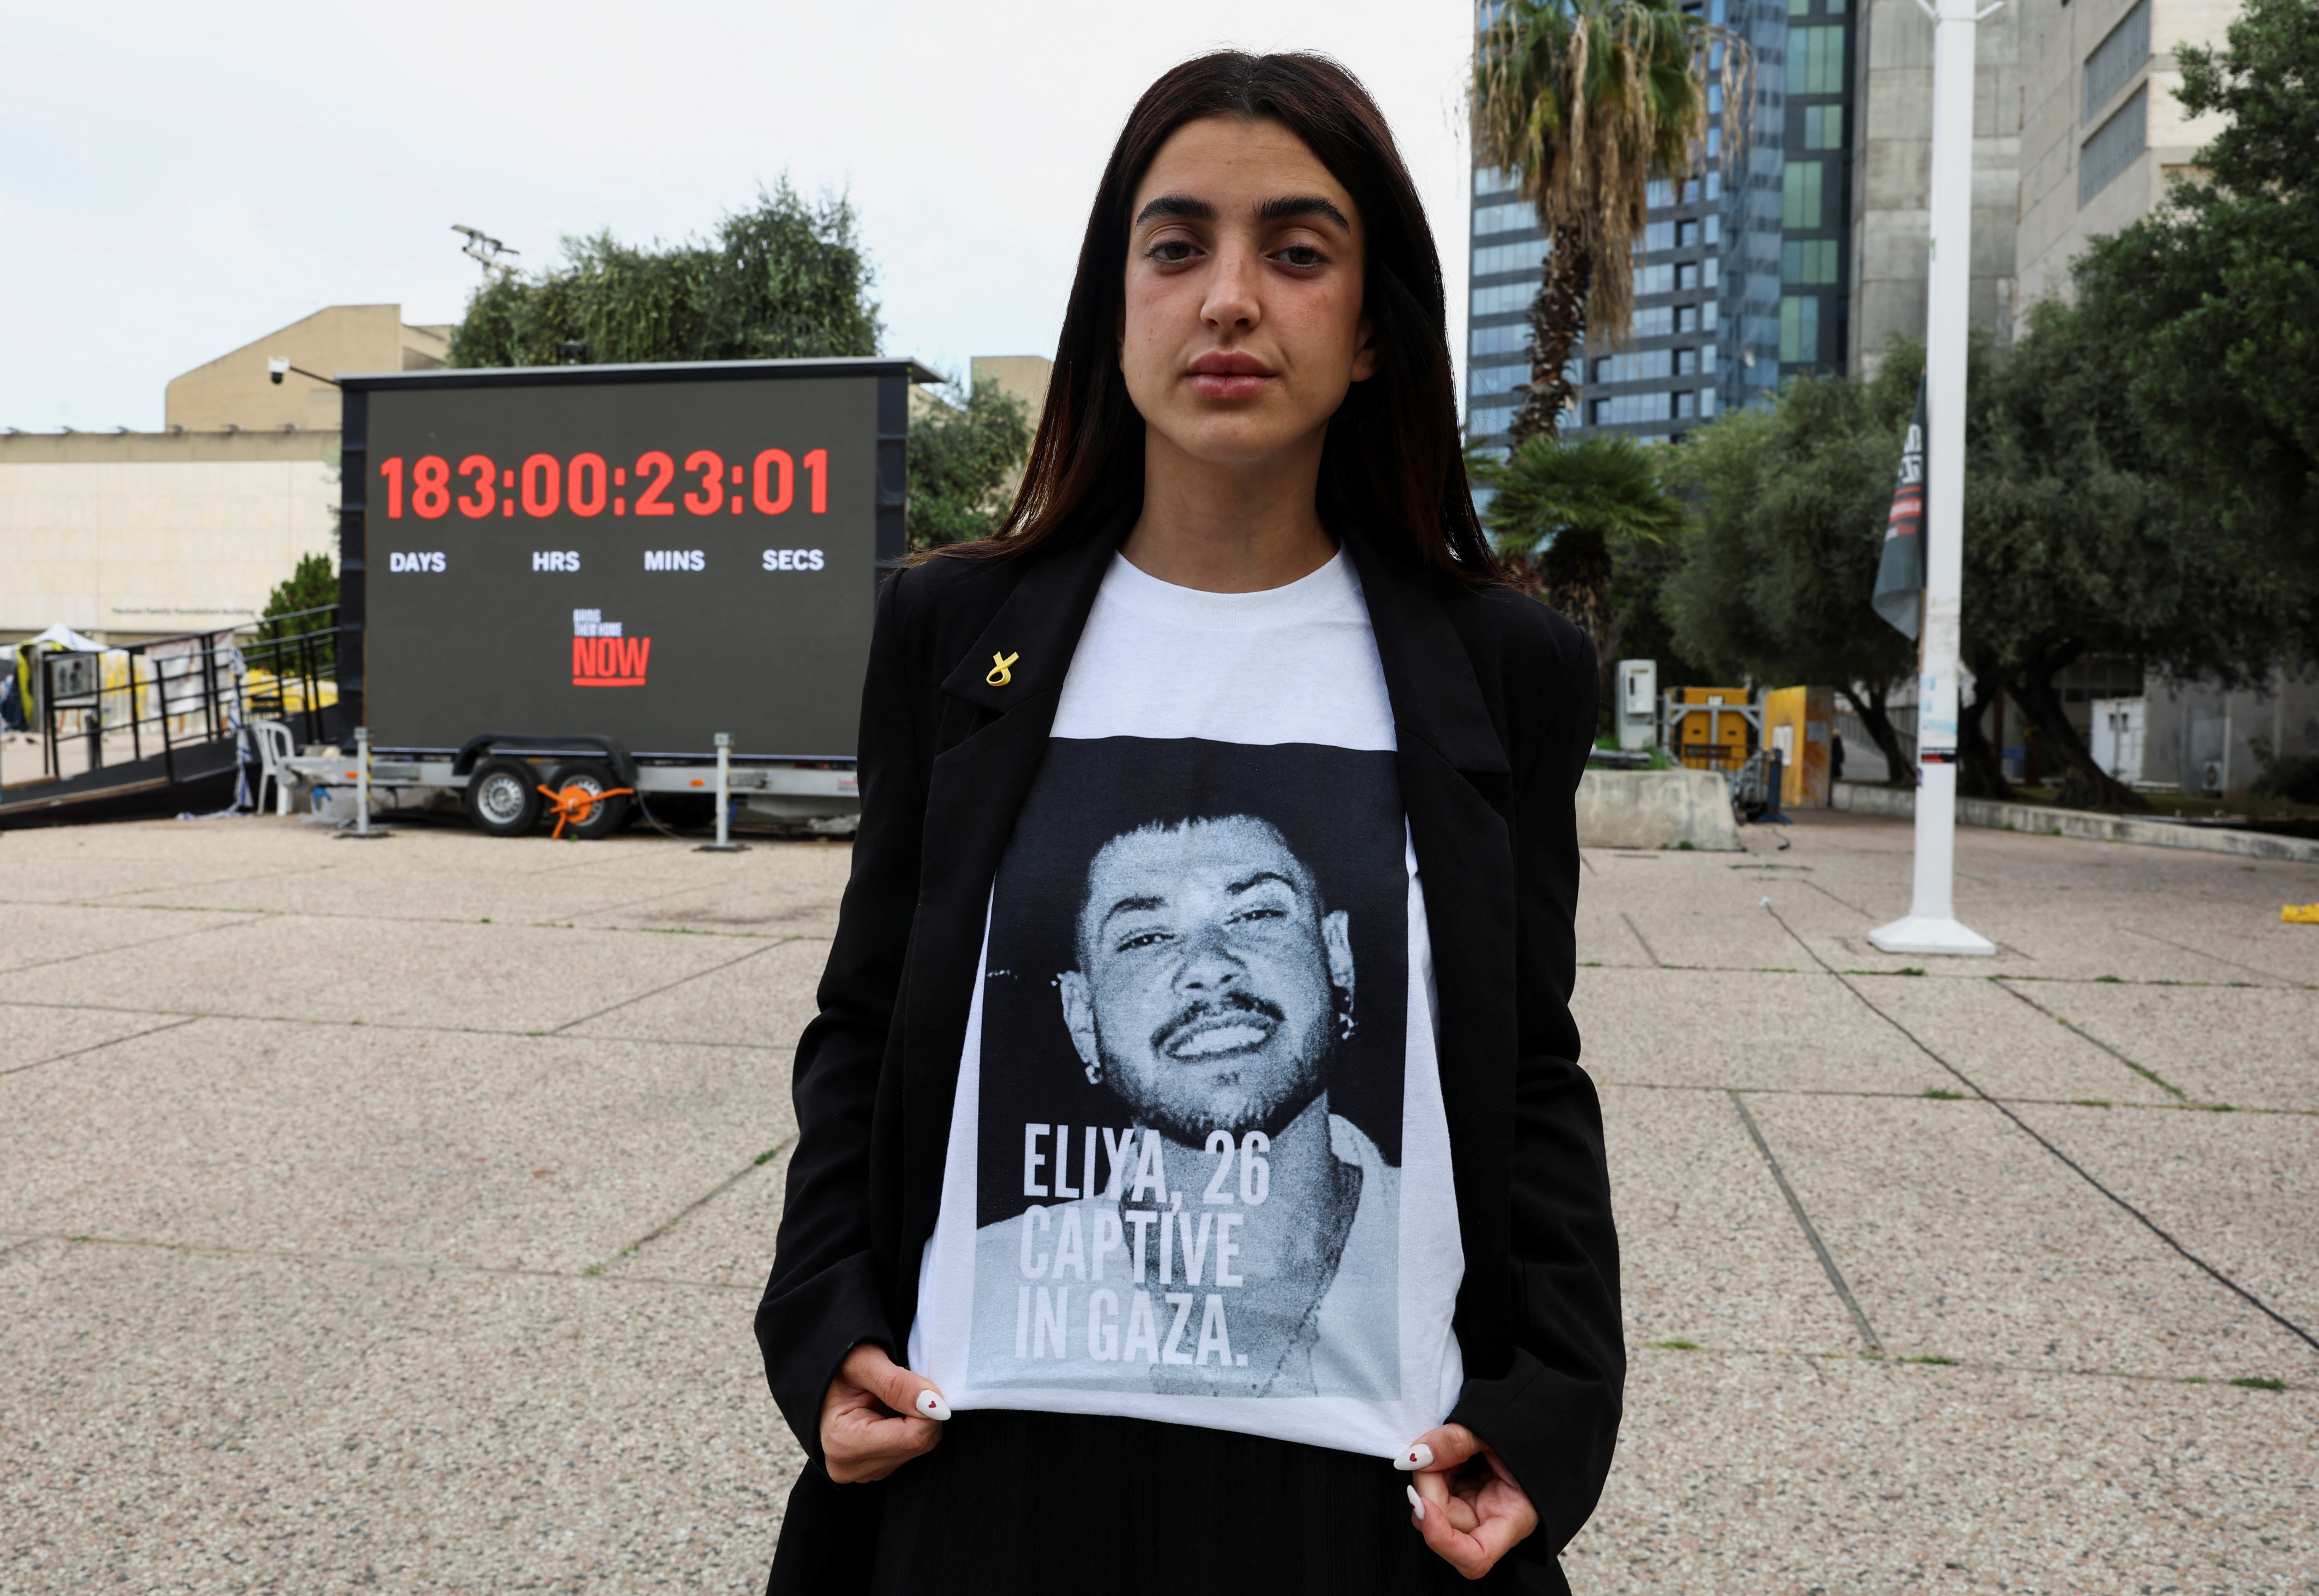 Ziv Abud, the girlfriend of hostage Eliya Cohen, who was kidnapped during the October 7 attack on Israel by Palestinian Islamist group Hamas from Gaza, shows her t-shirt with a picture of Eliya during an interview with Reuters, in Tel Aviv